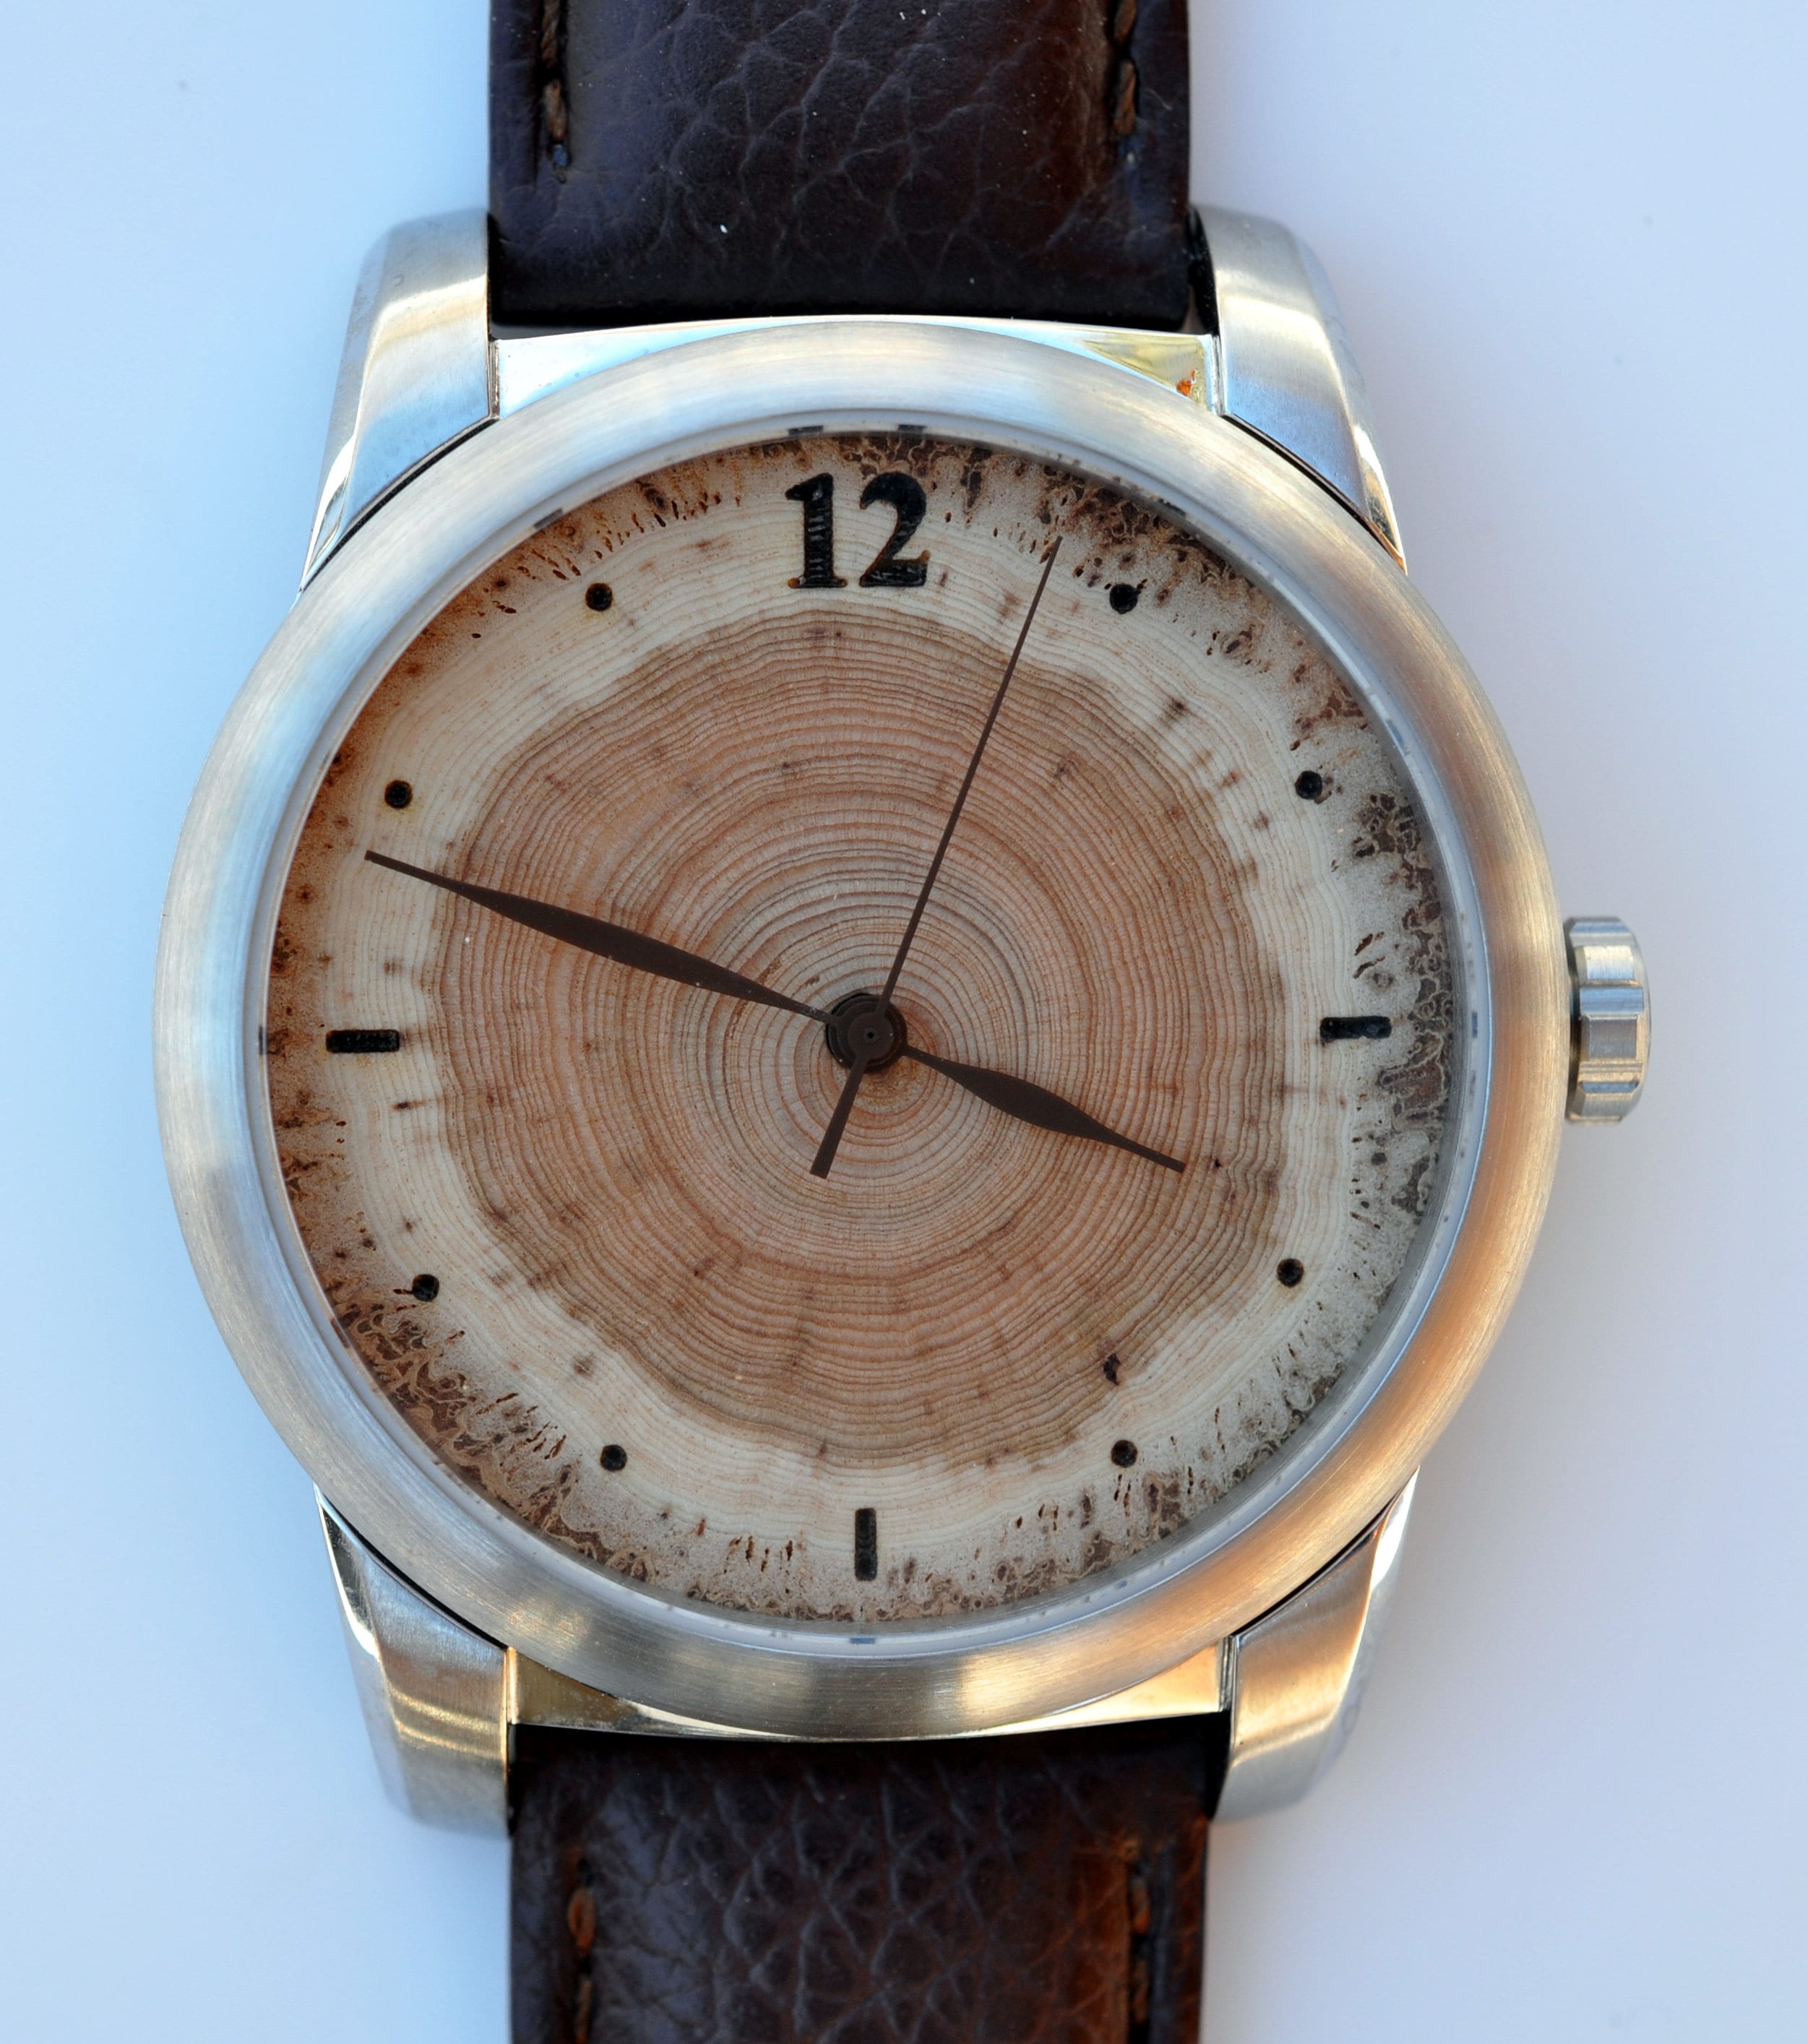 5th Anniversary Gift Wood Watch. Wood Watch Showing Five Annual Tree Rings. Best 5 Year Anniversary Present